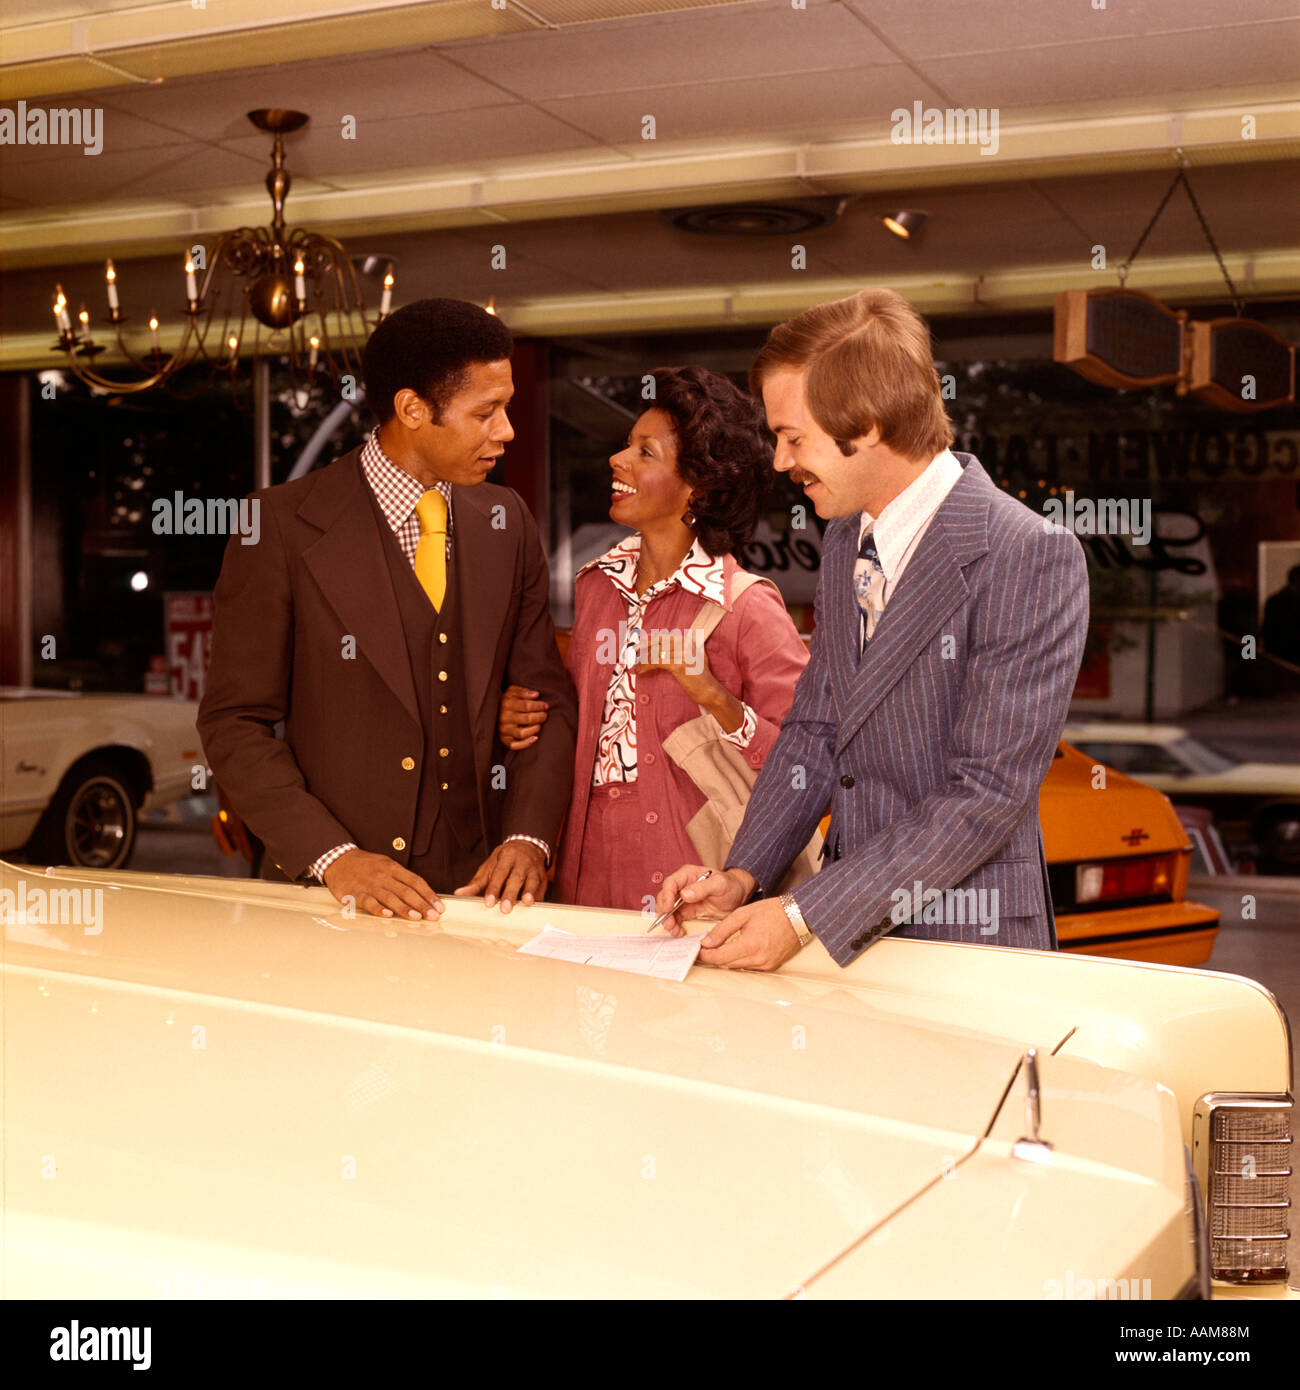 1970 1970s AFRICAN-AMERICAN COUPLE MAN WOMAN BUYING NEW CAR WITH SALESMAN DEALER AUTOMOBILE SHOWROOM Stock Photo